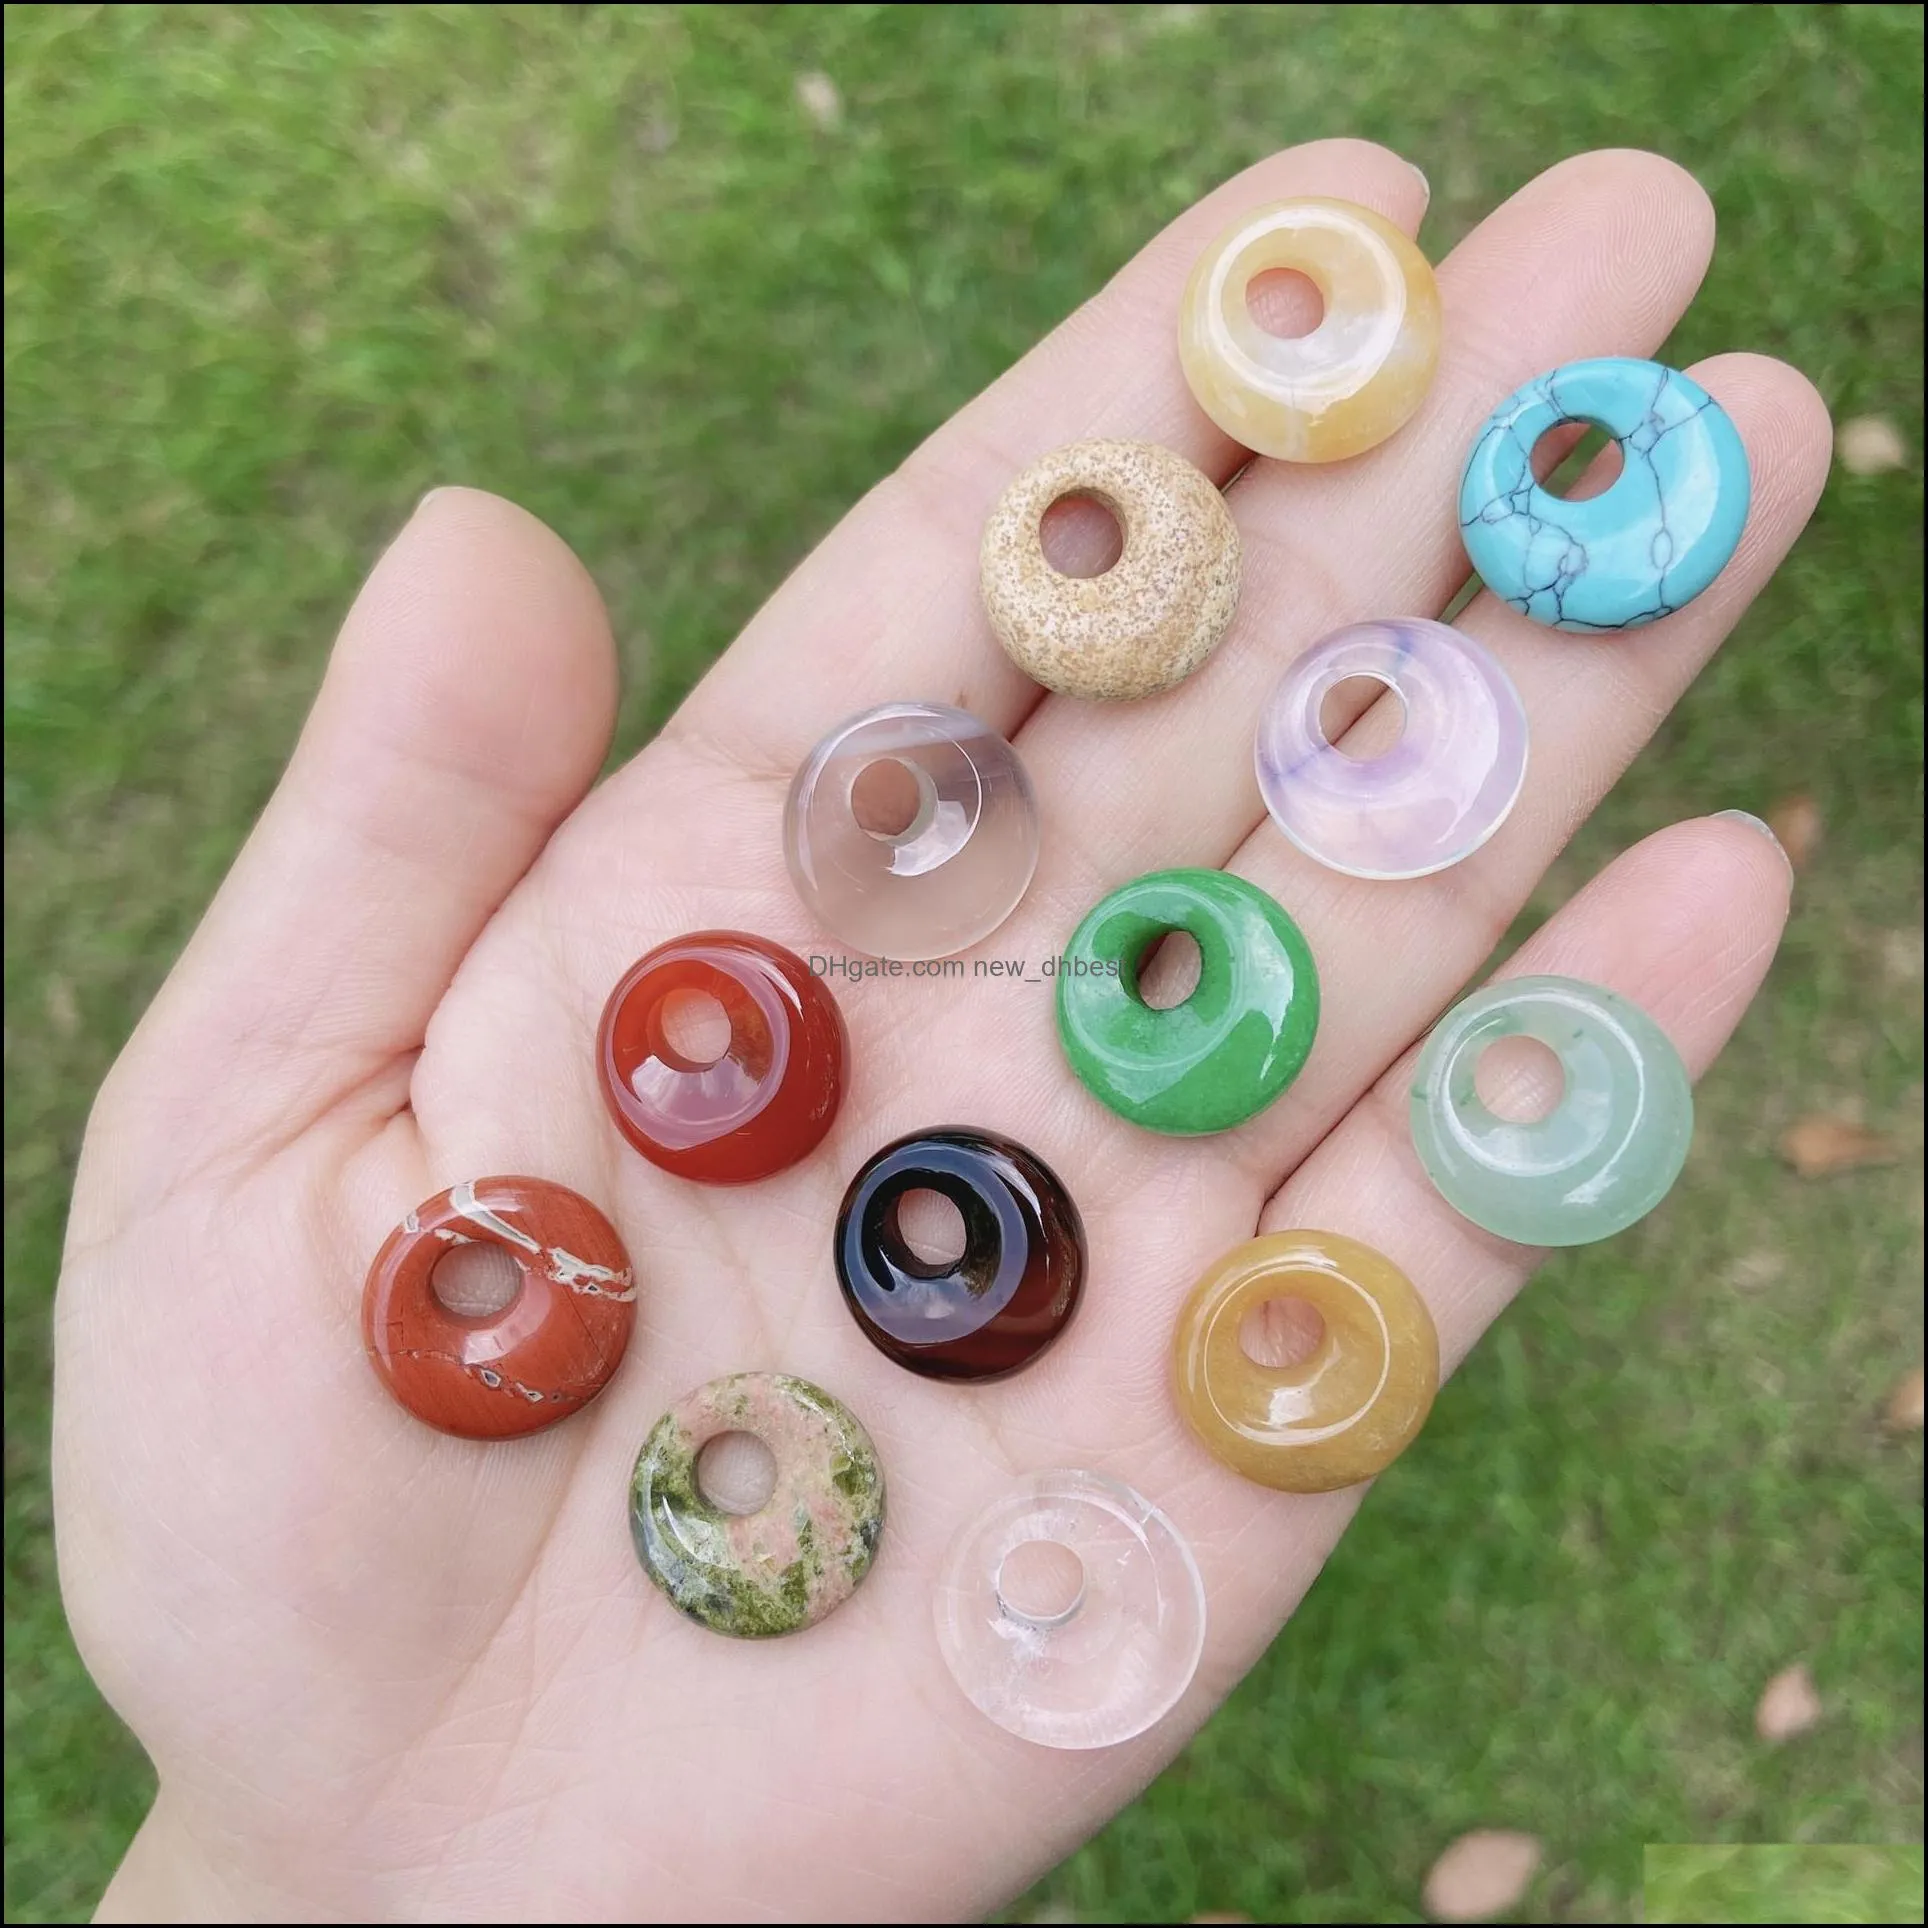 fashion 18mm gogo donut charms natural crystal stone beads for jewelry making necklace pendant earrings charm accessories